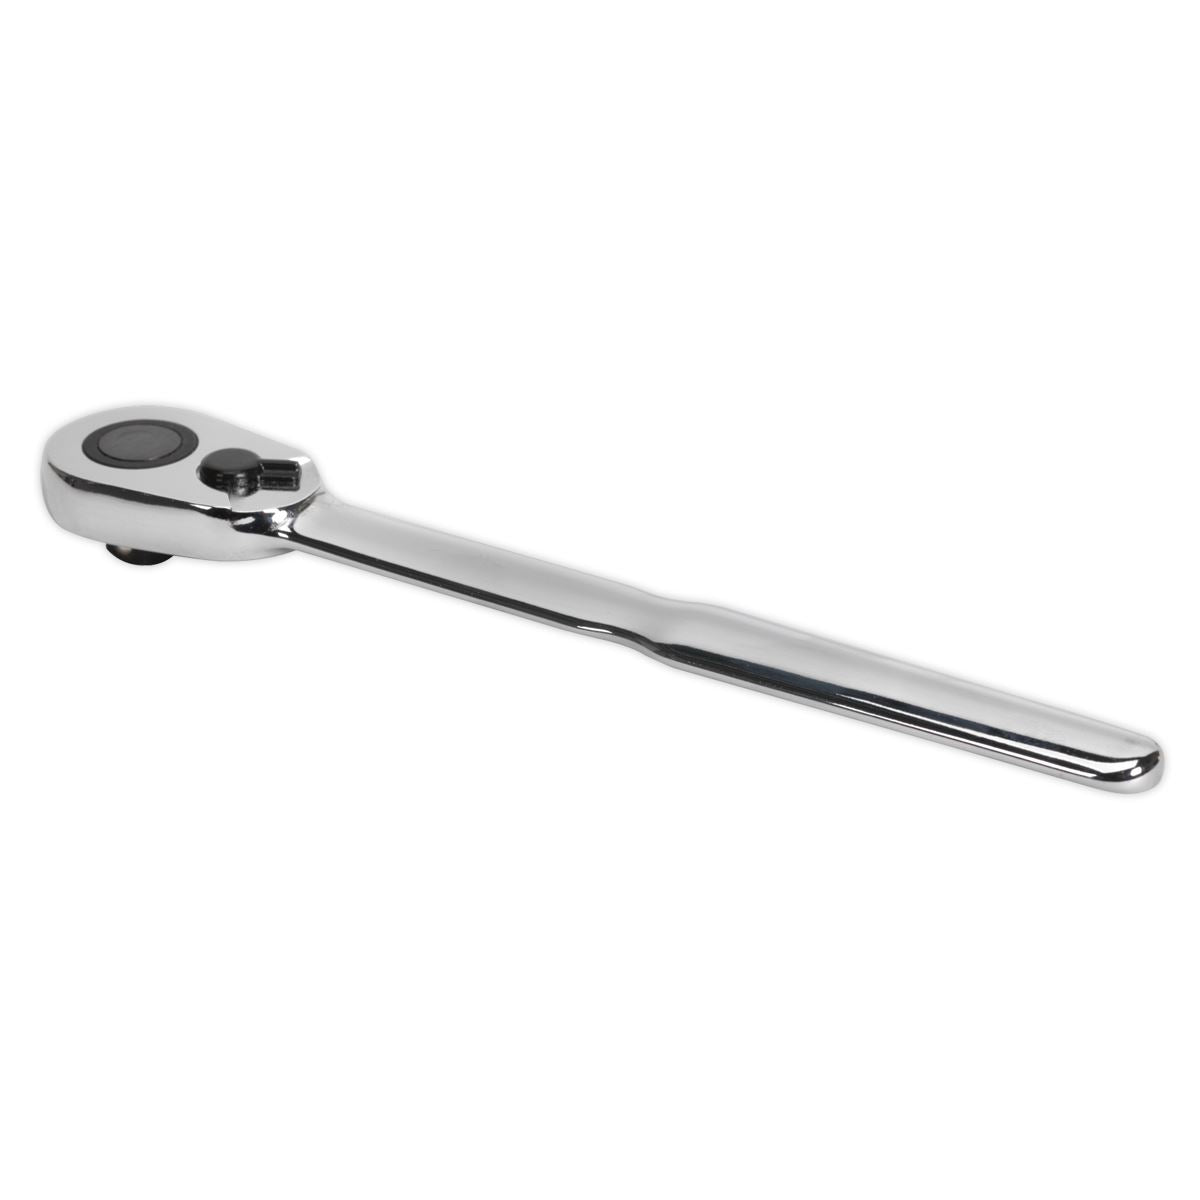 Sealey Premier Ratchet Wrench Low Profile 3/8"Sq Drive